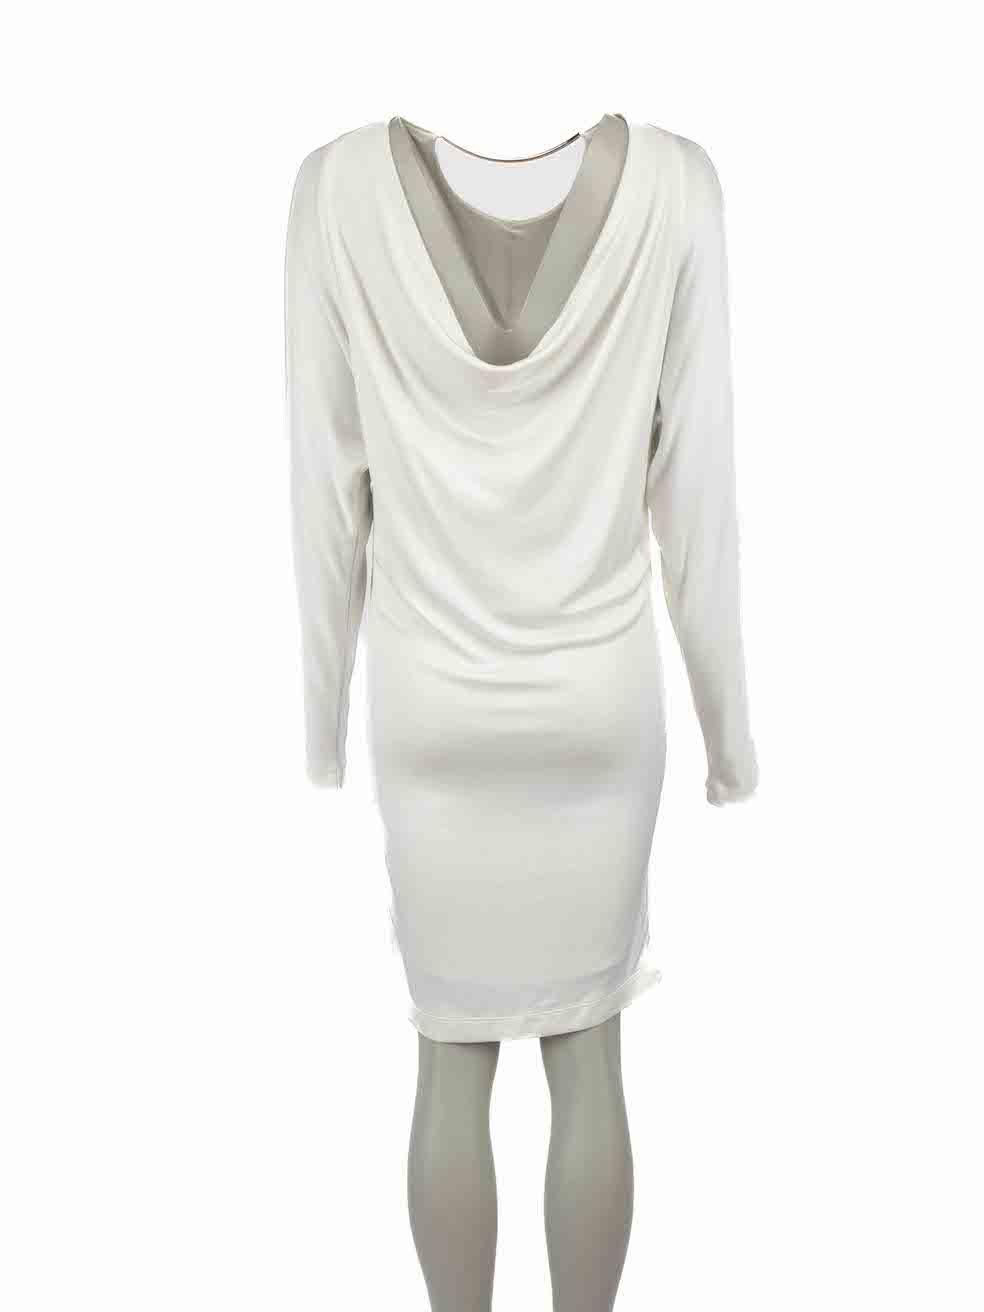 Alexander Wang T.Alexander Wang White Draped Metal Bar Dress Size XS In Excellent Condition For Sale In London, GB